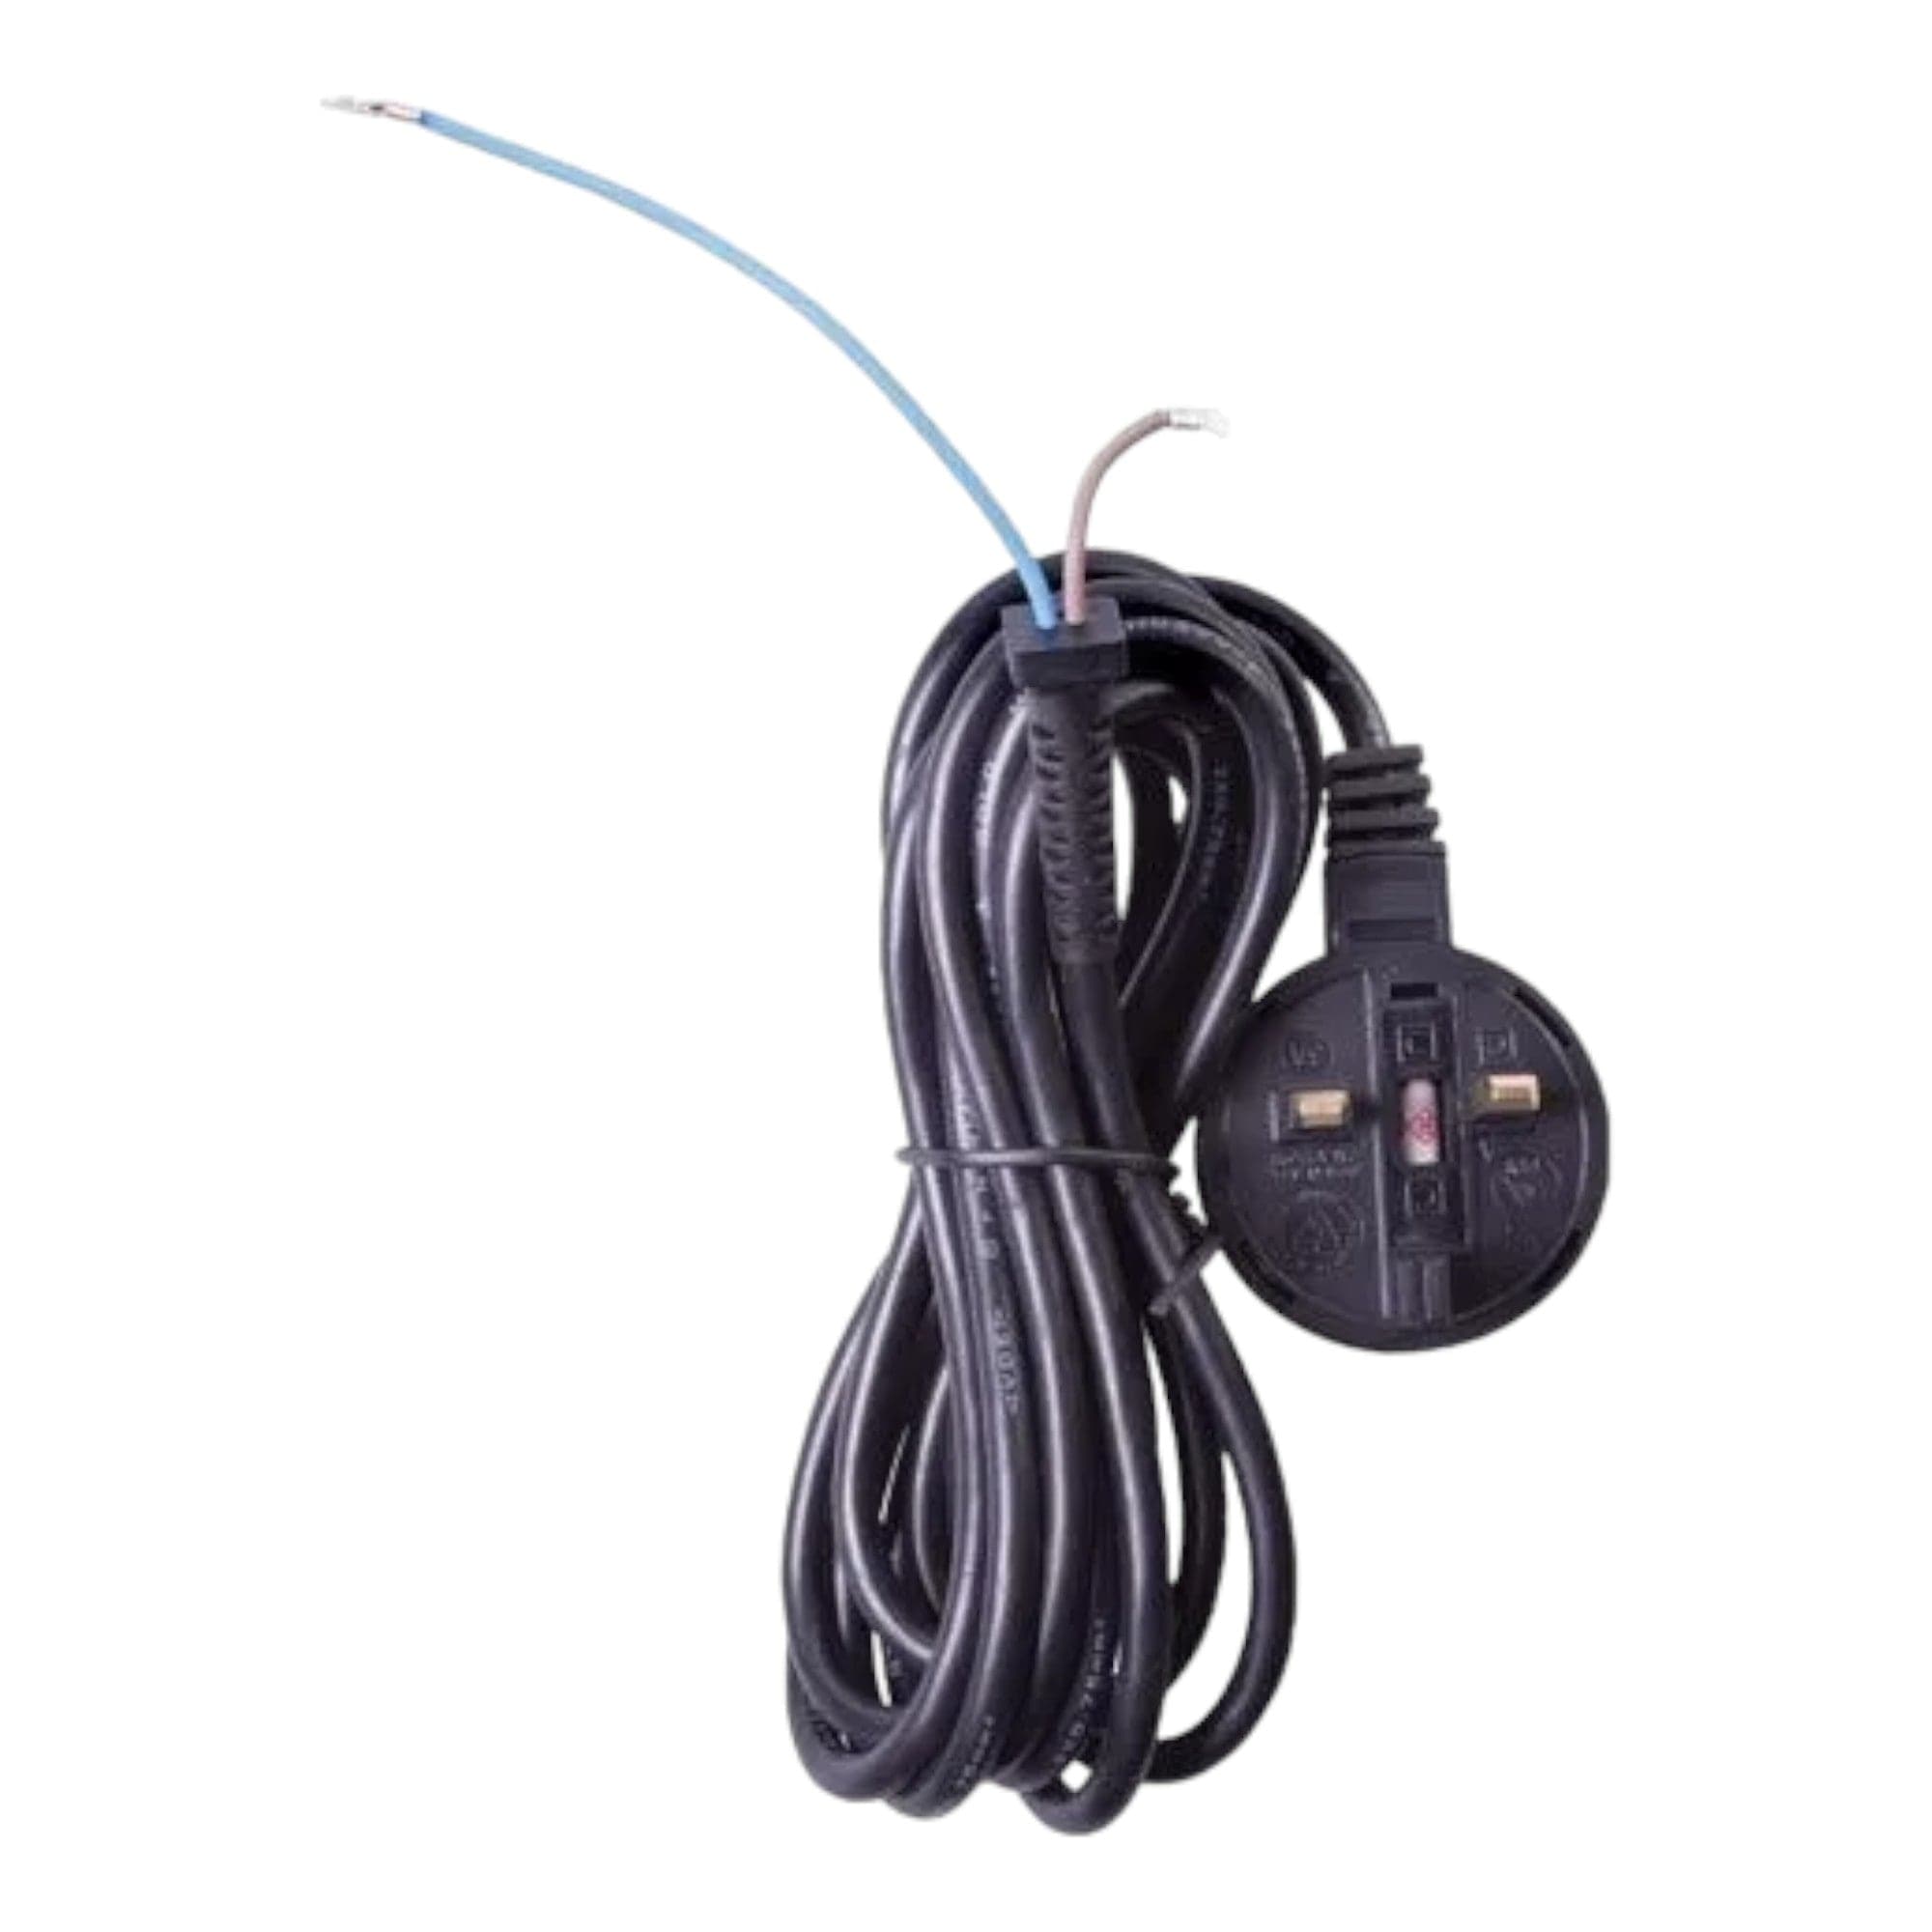 Wahl - Replacement Power Lead Cord